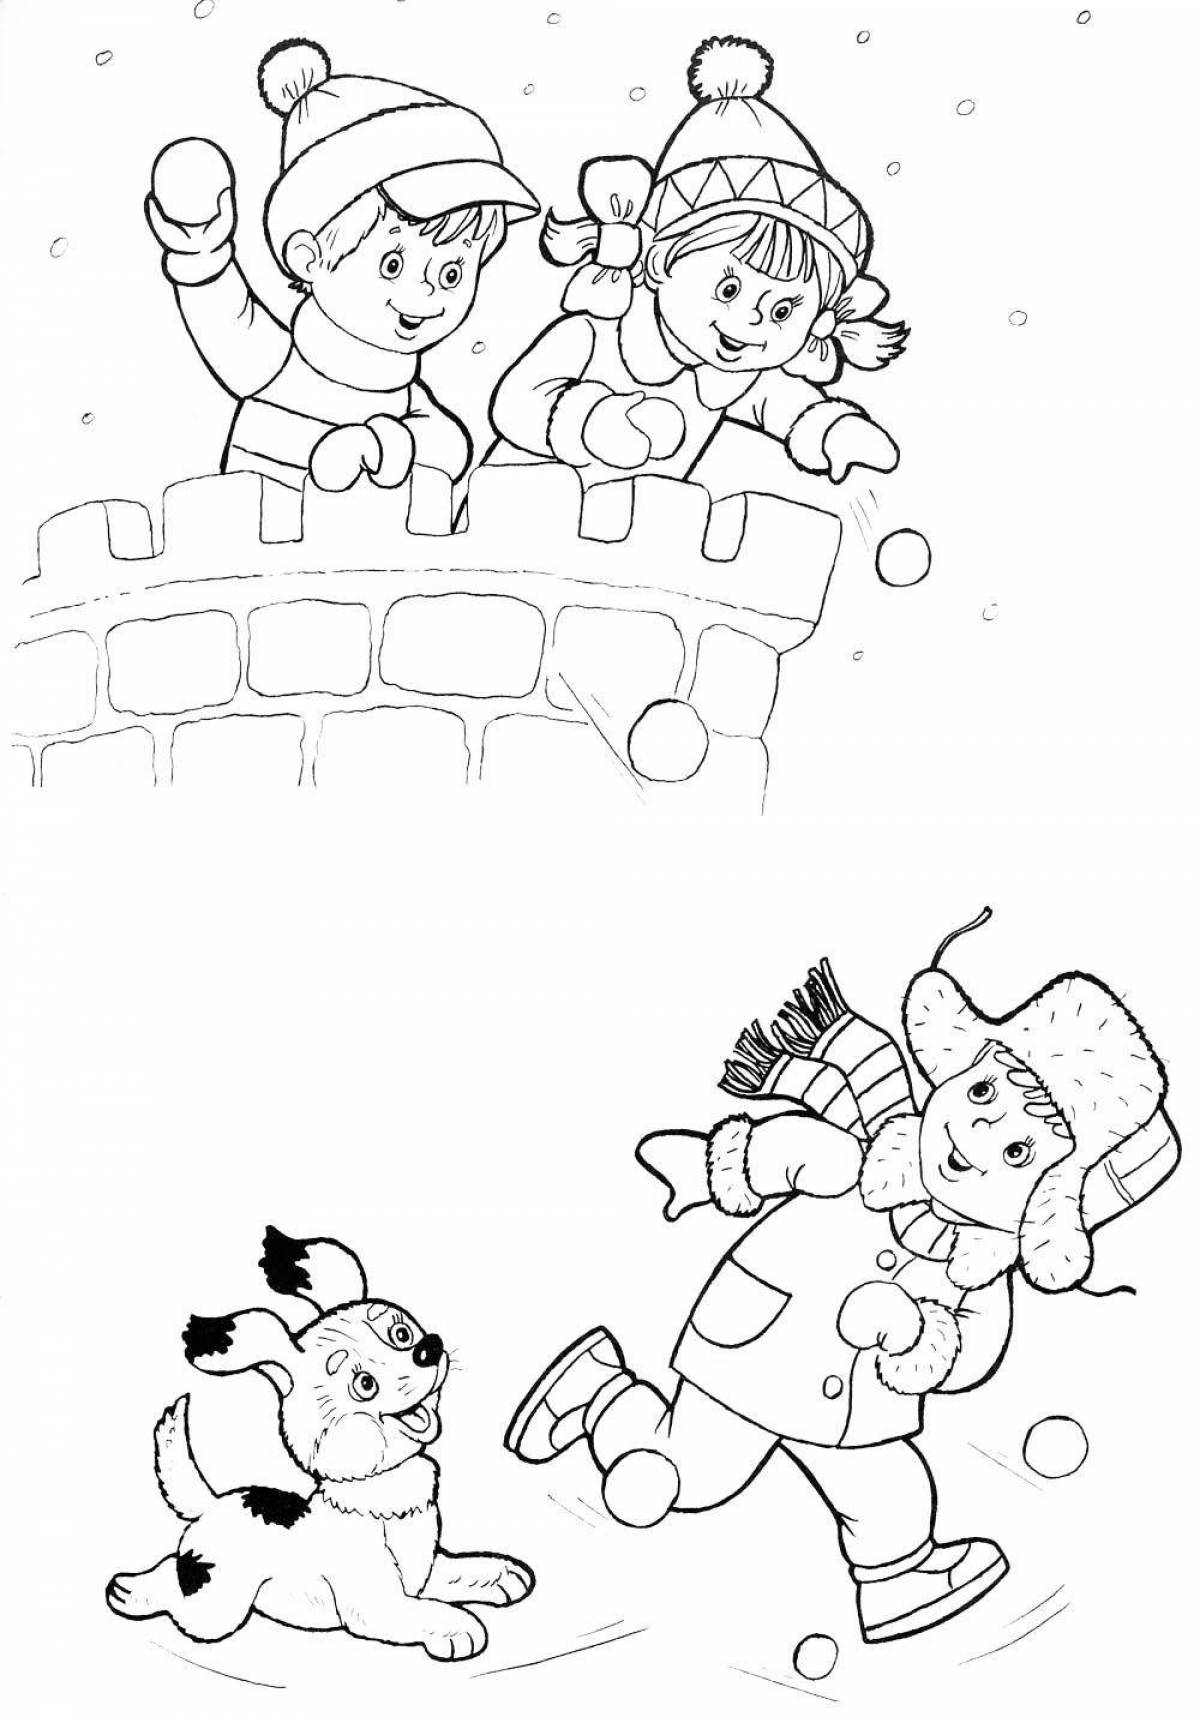 Glossy snowball game coloring page